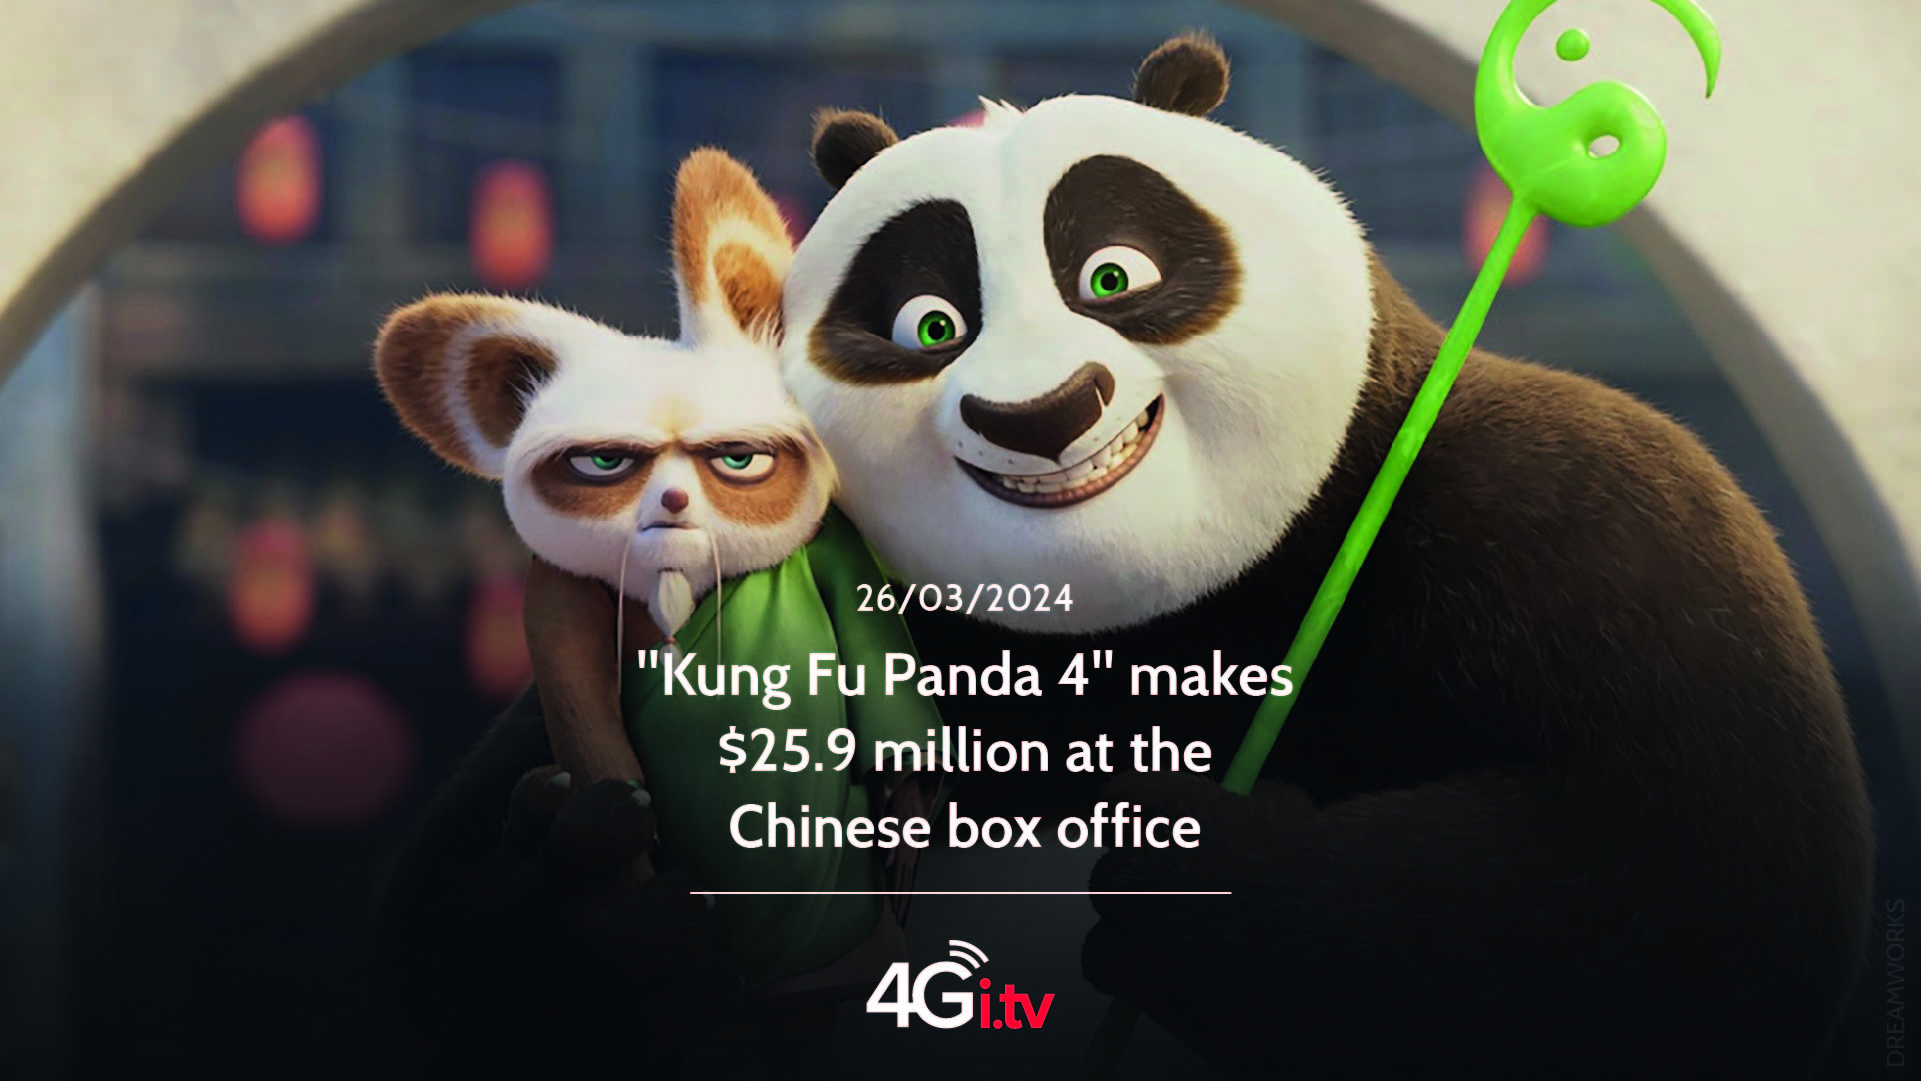 Read more about the article “Kung Fu Panda 4” makes $25.9 million at the Chinese box office